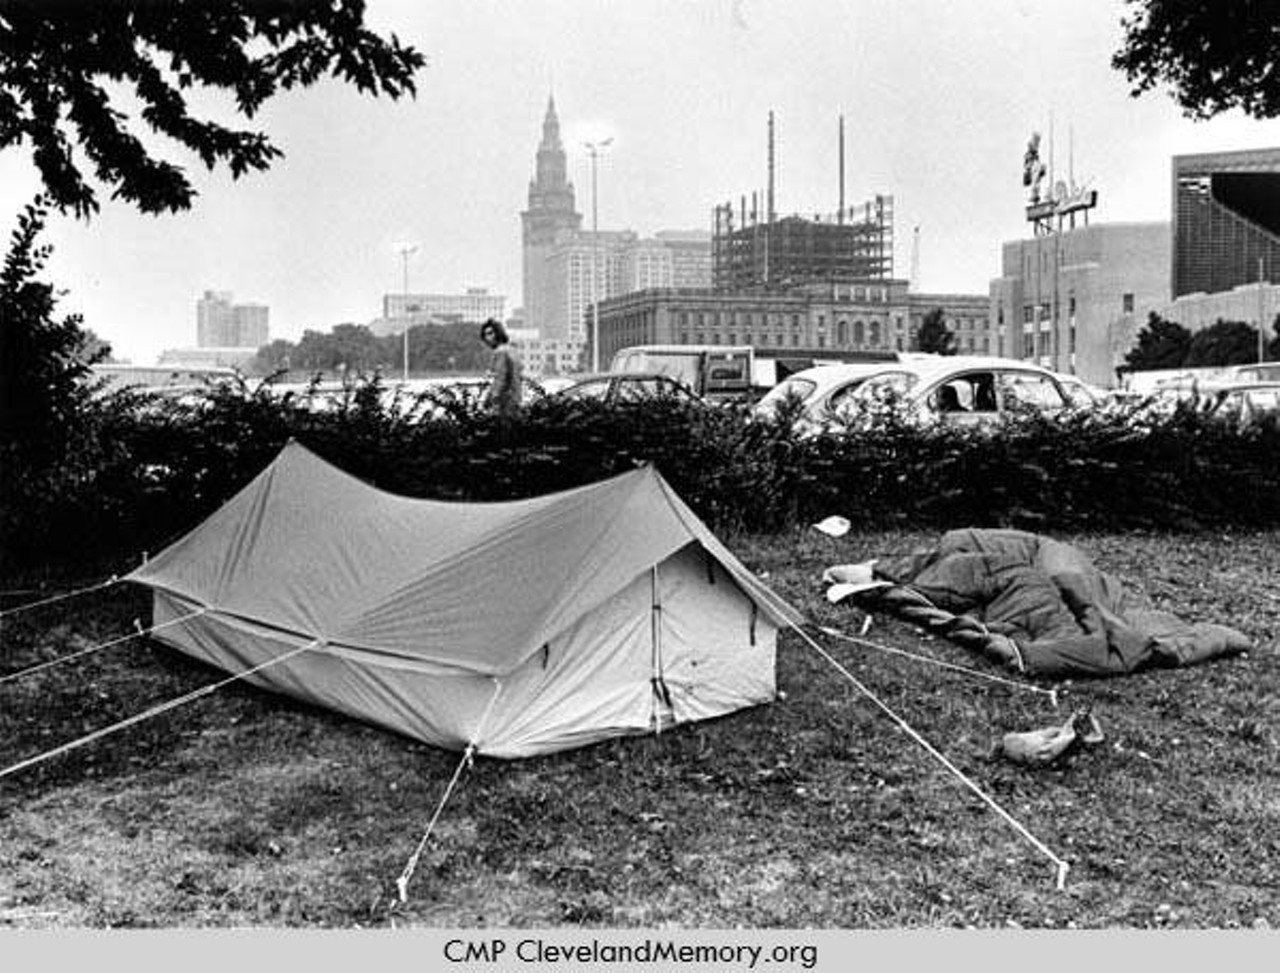  Camping Before Crosby, Stills, Nash and Young Concert, 1974 